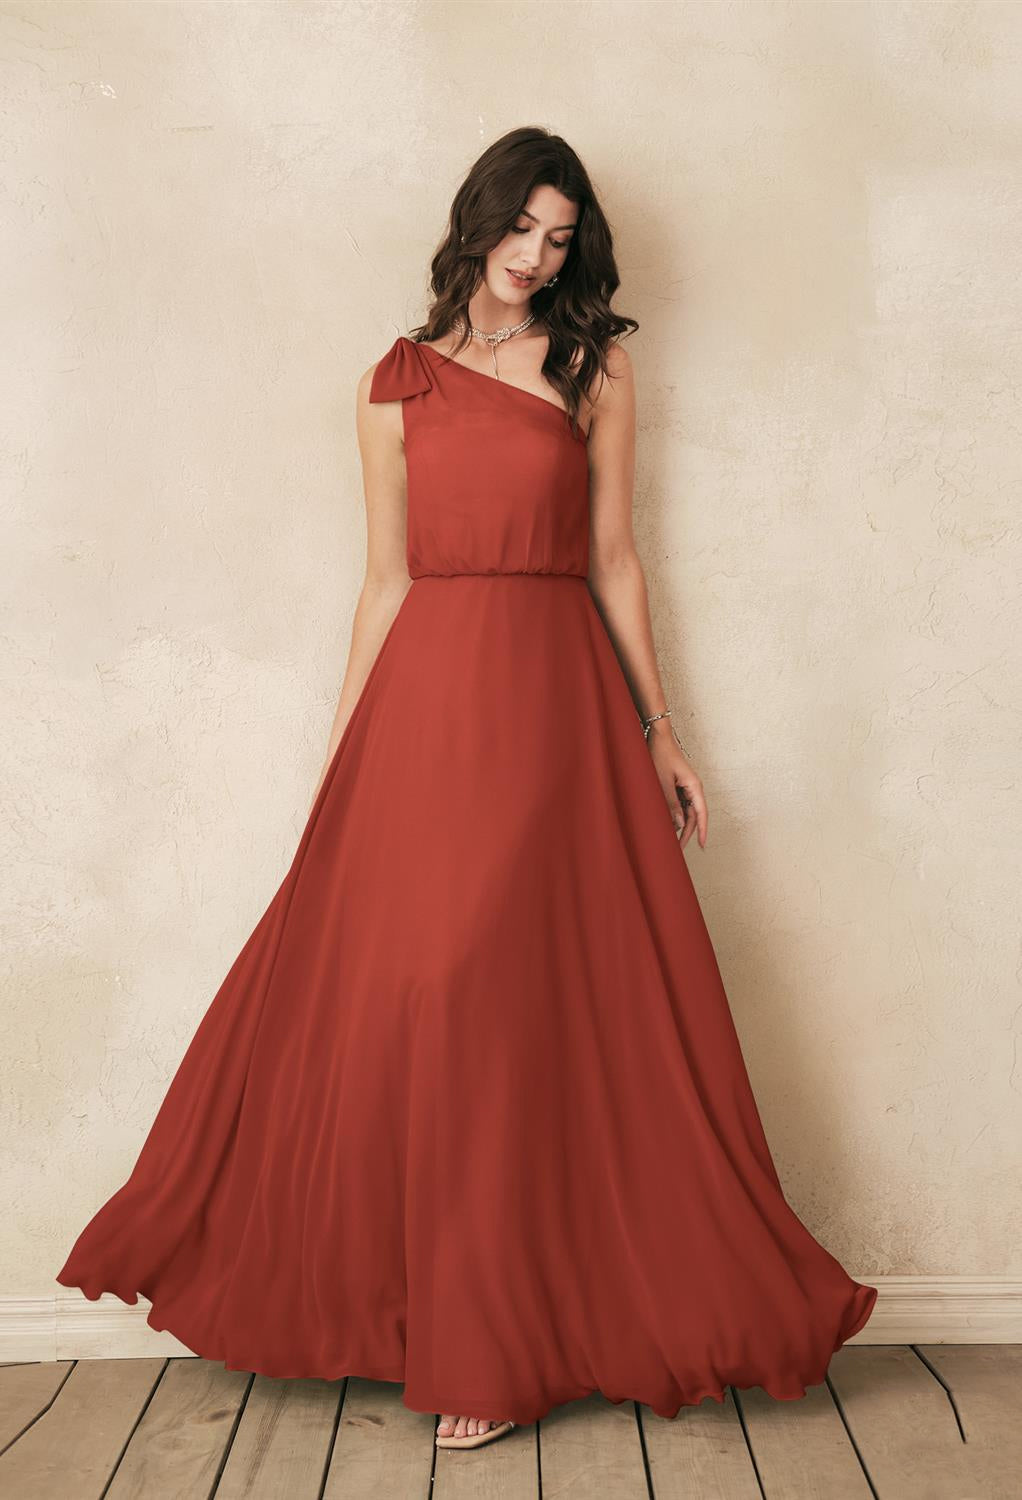 A woman in a long red dress, the Robina - Chiffon Bridesmaid Dress - Off The Rack by Bergamot Bridal, posing against a wall.